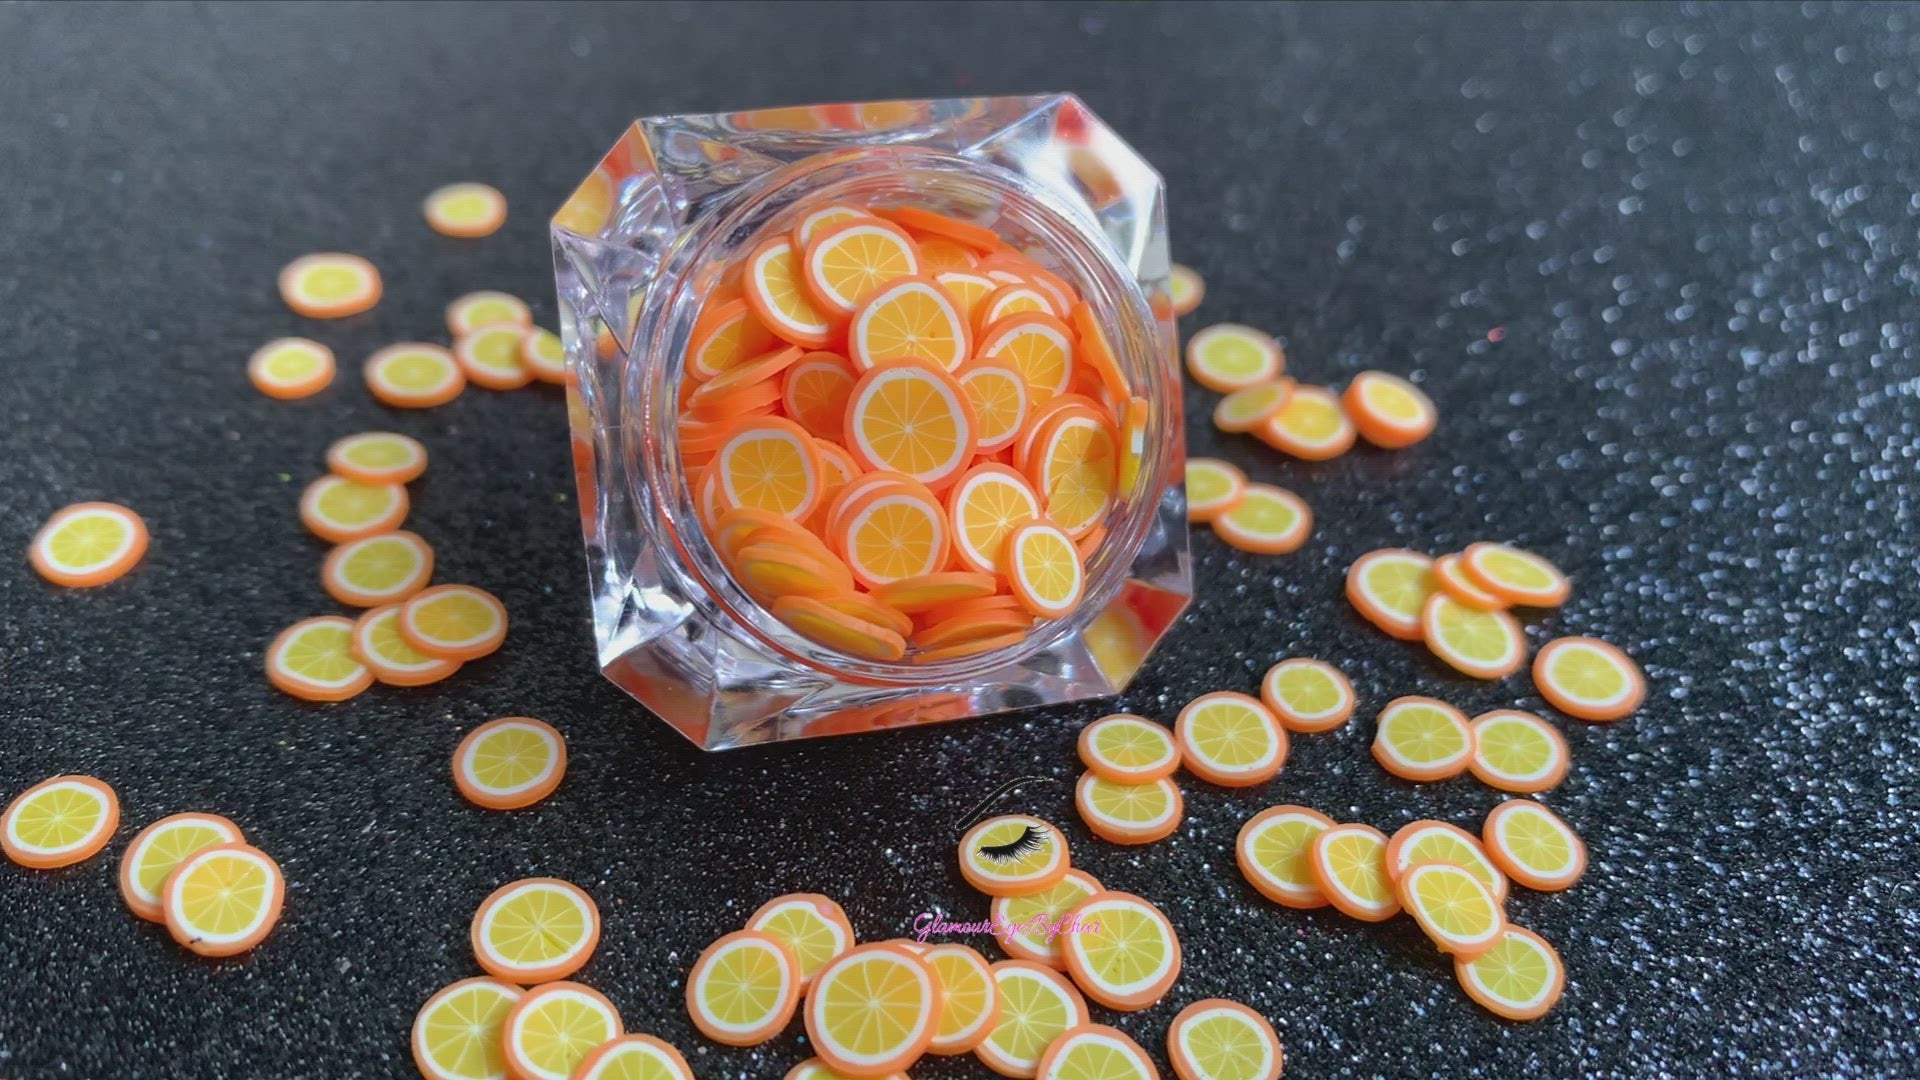 These Orange Fruit Slices are PERFECT for 3D nail or body art. They can also be used for a DIY craft project. The fruit slices are made of polymer clay and are approximately 3mm/0.12 inch in size. Comes in 5g jars only. Note: Orange Fruit Slices are not recommended for use in the immediate eye area. Tip: Apply some of our glitter to your nails to really GLAMOUREYES your look.